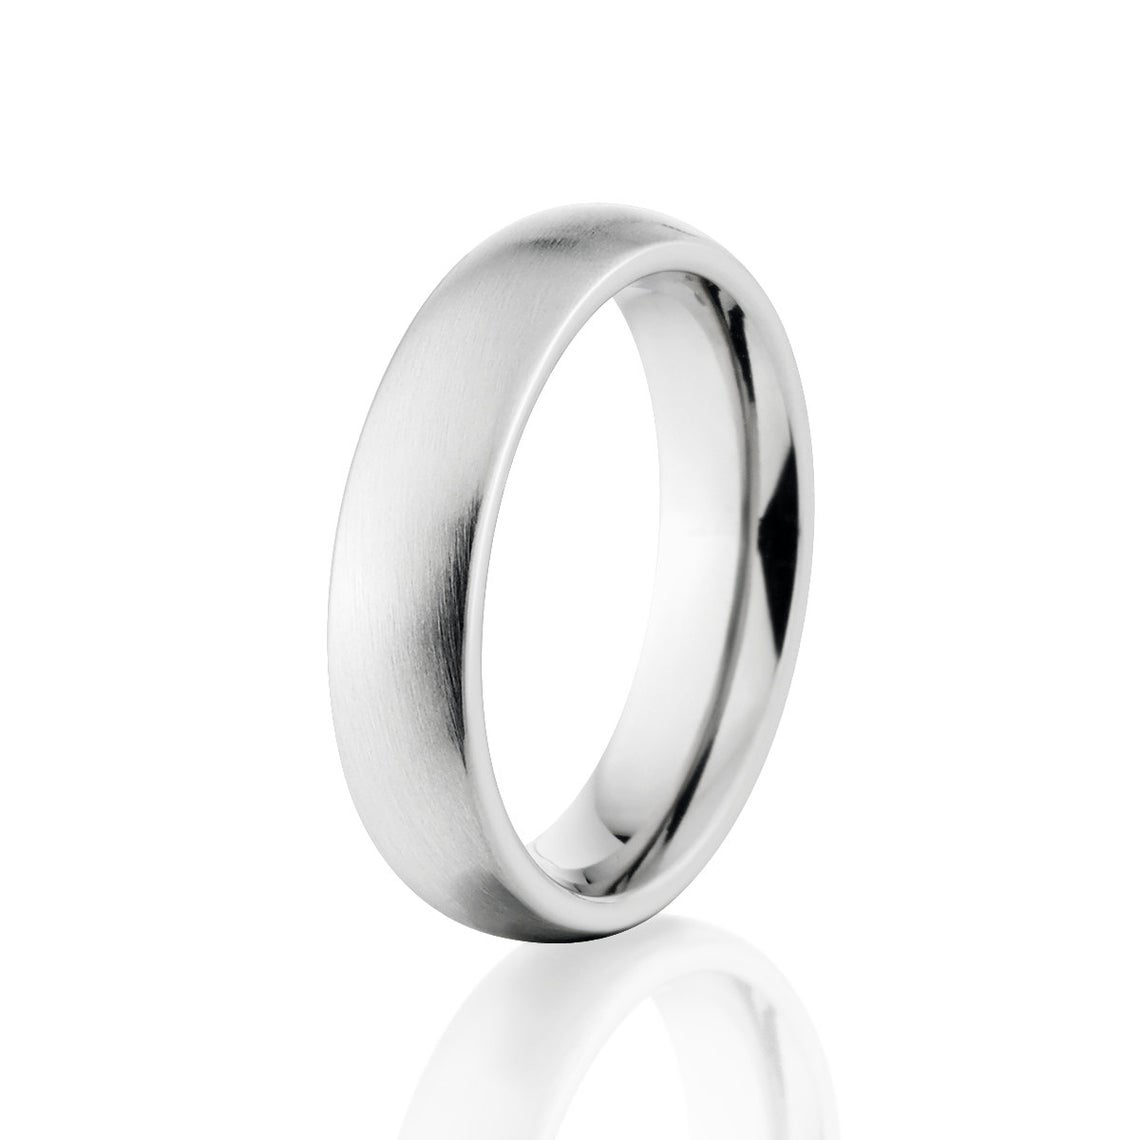 6mm wide cobalt wedding band with a brush finish and rounded profile